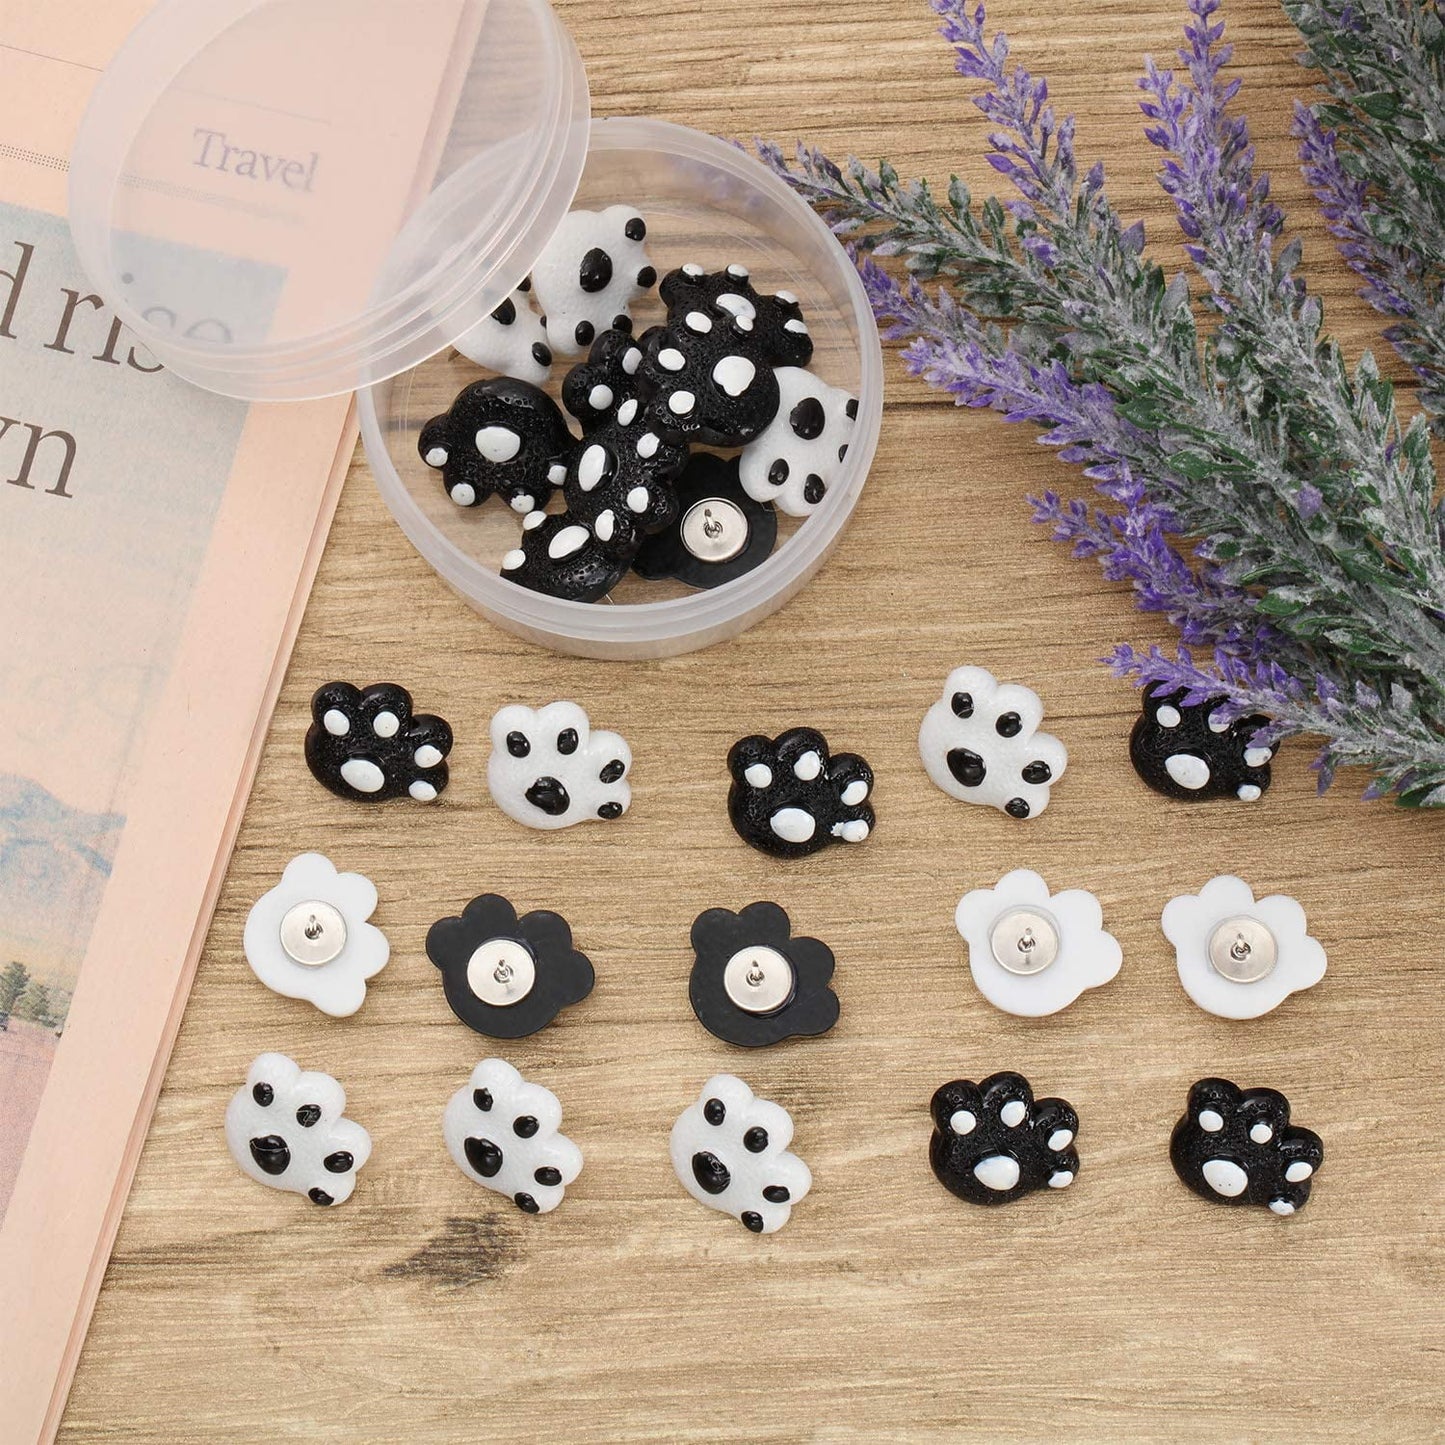 25 Pieces Paw Print Push Pins Animal Paw Thumb Tacks Decorative Pushpins for Cork Boards Home and Office (Color 1)